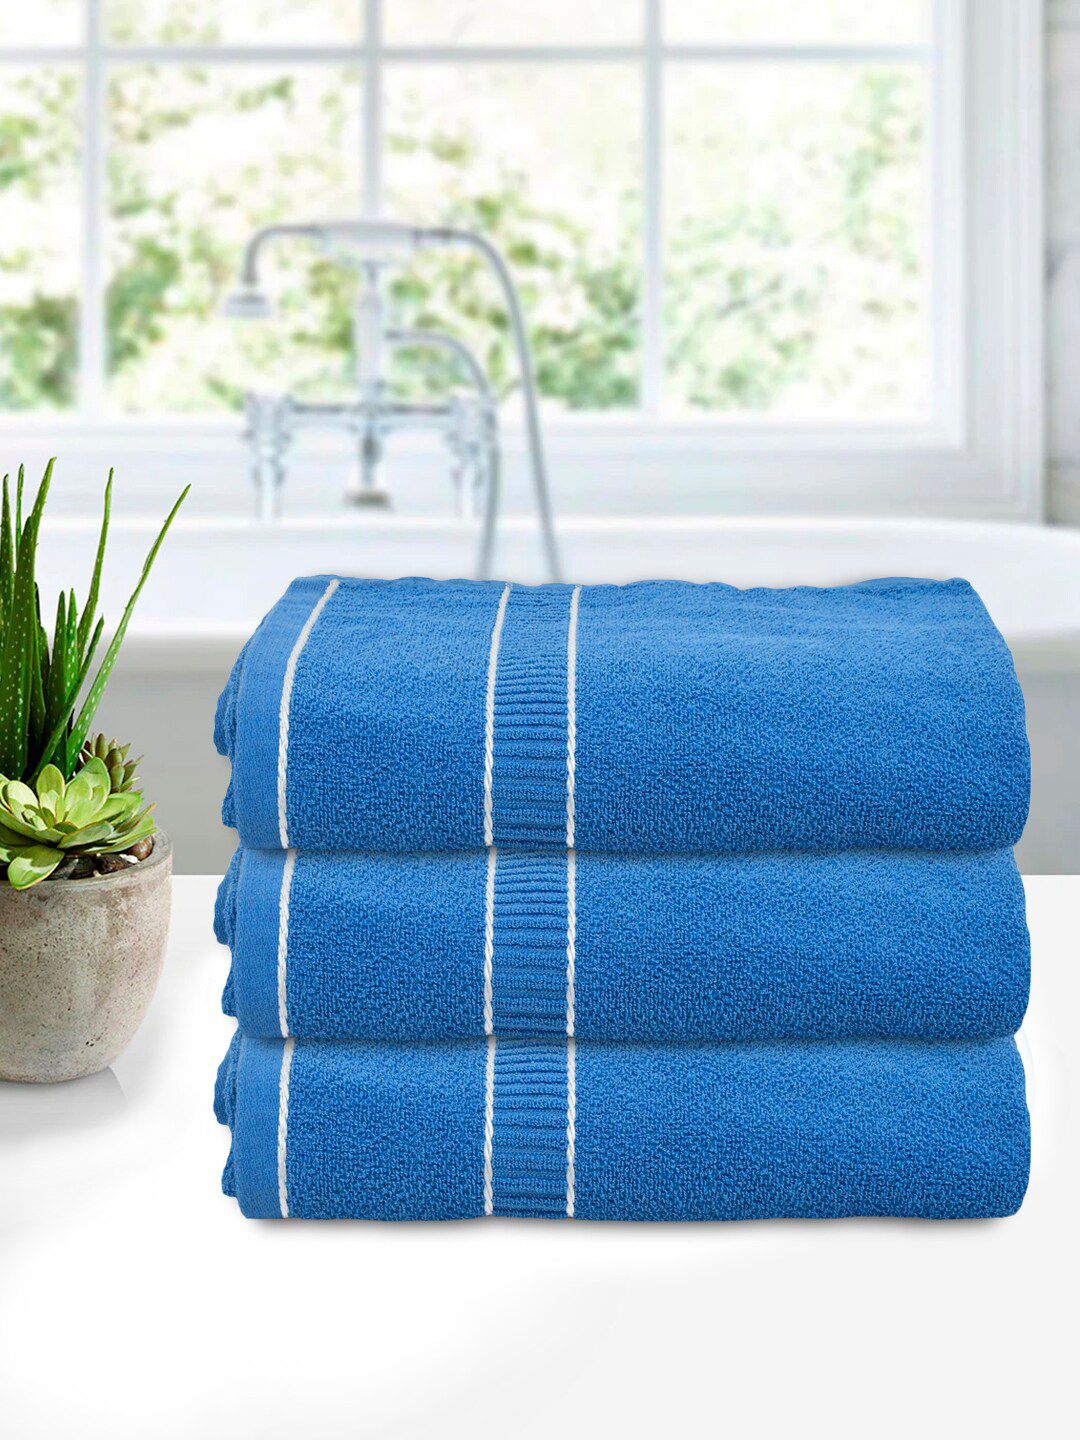 Kuber Industries Blue Pack of 3 Soft Cotton 400 GSM Bath Towel Price in India